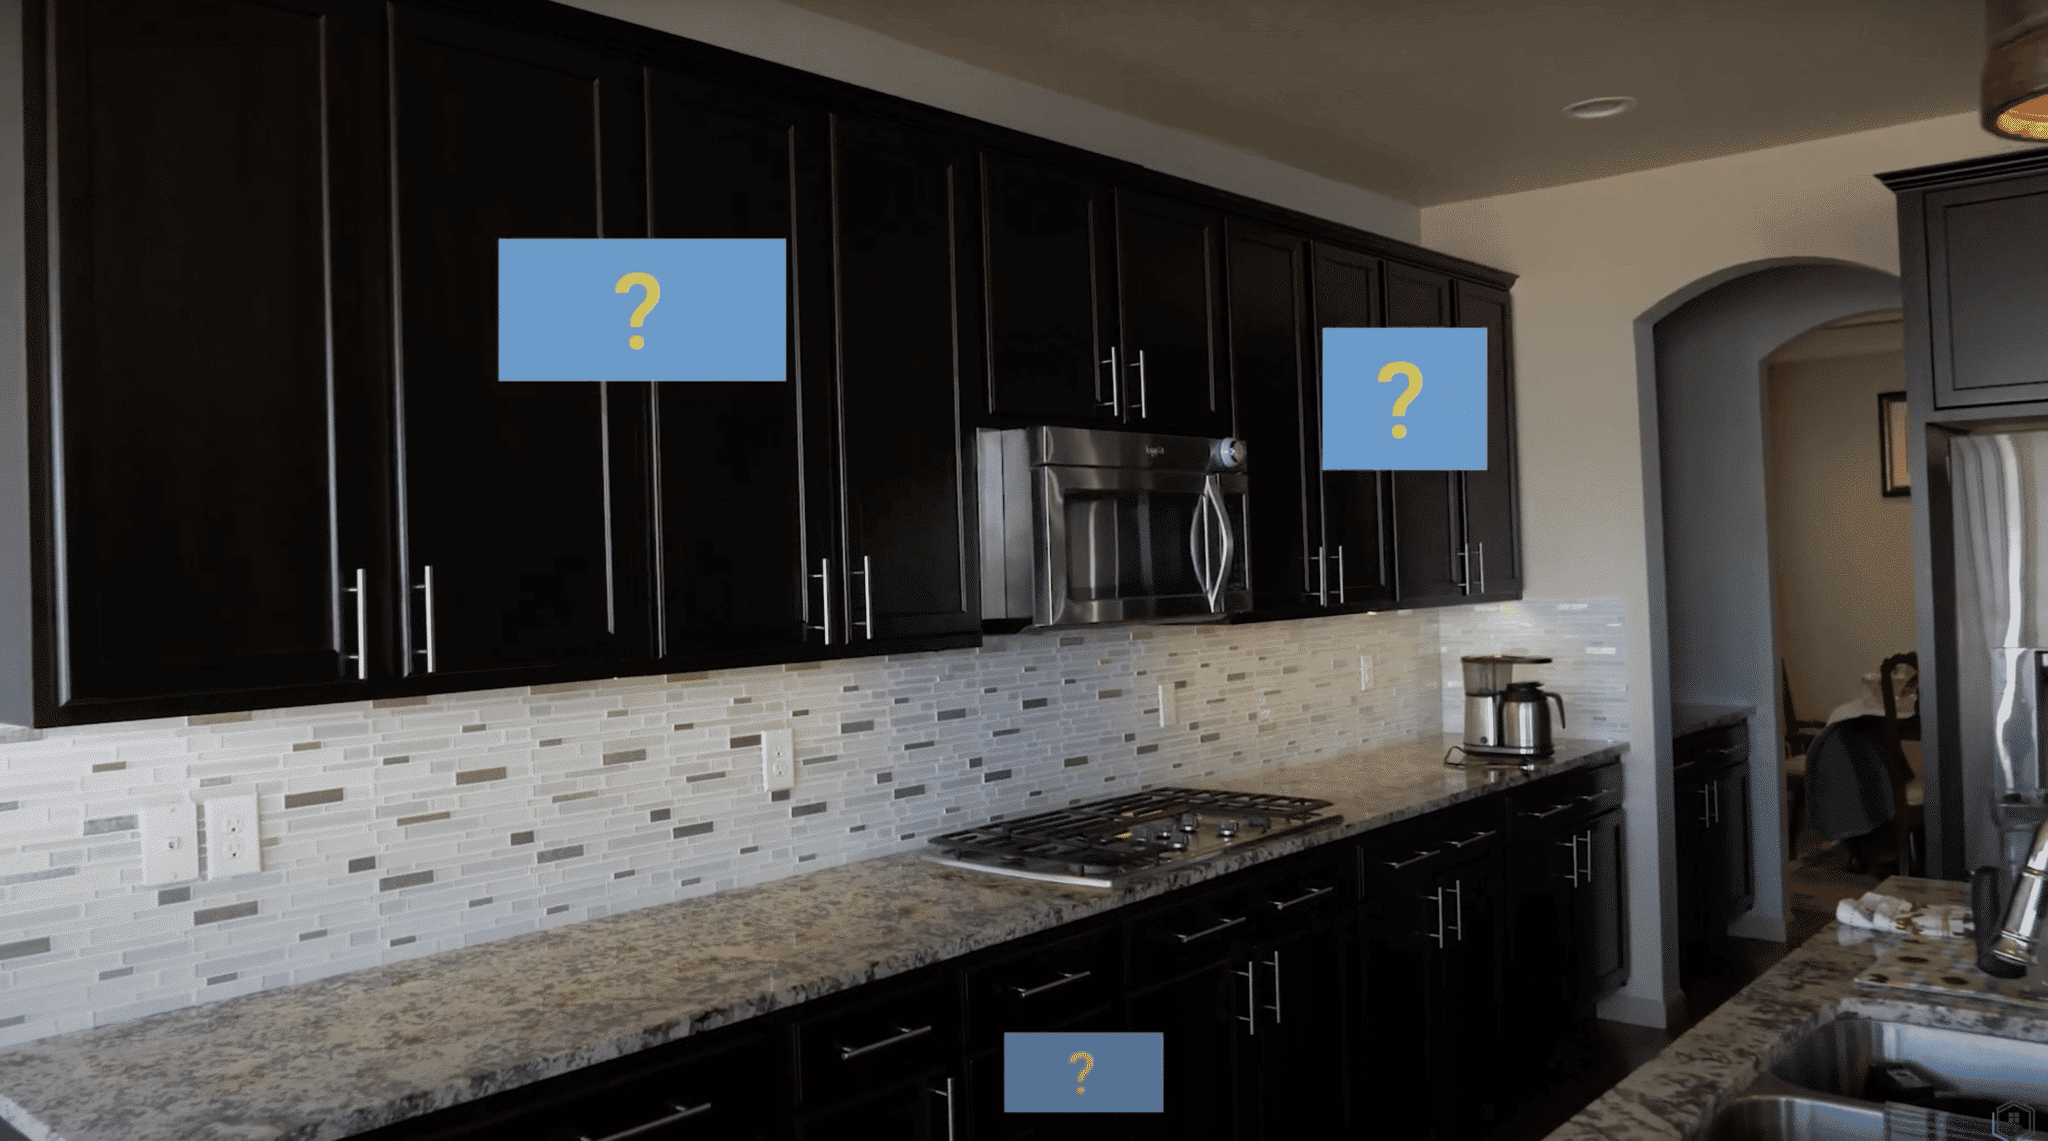 Image of black kitchen cabinets w/question marks on doors and drawers